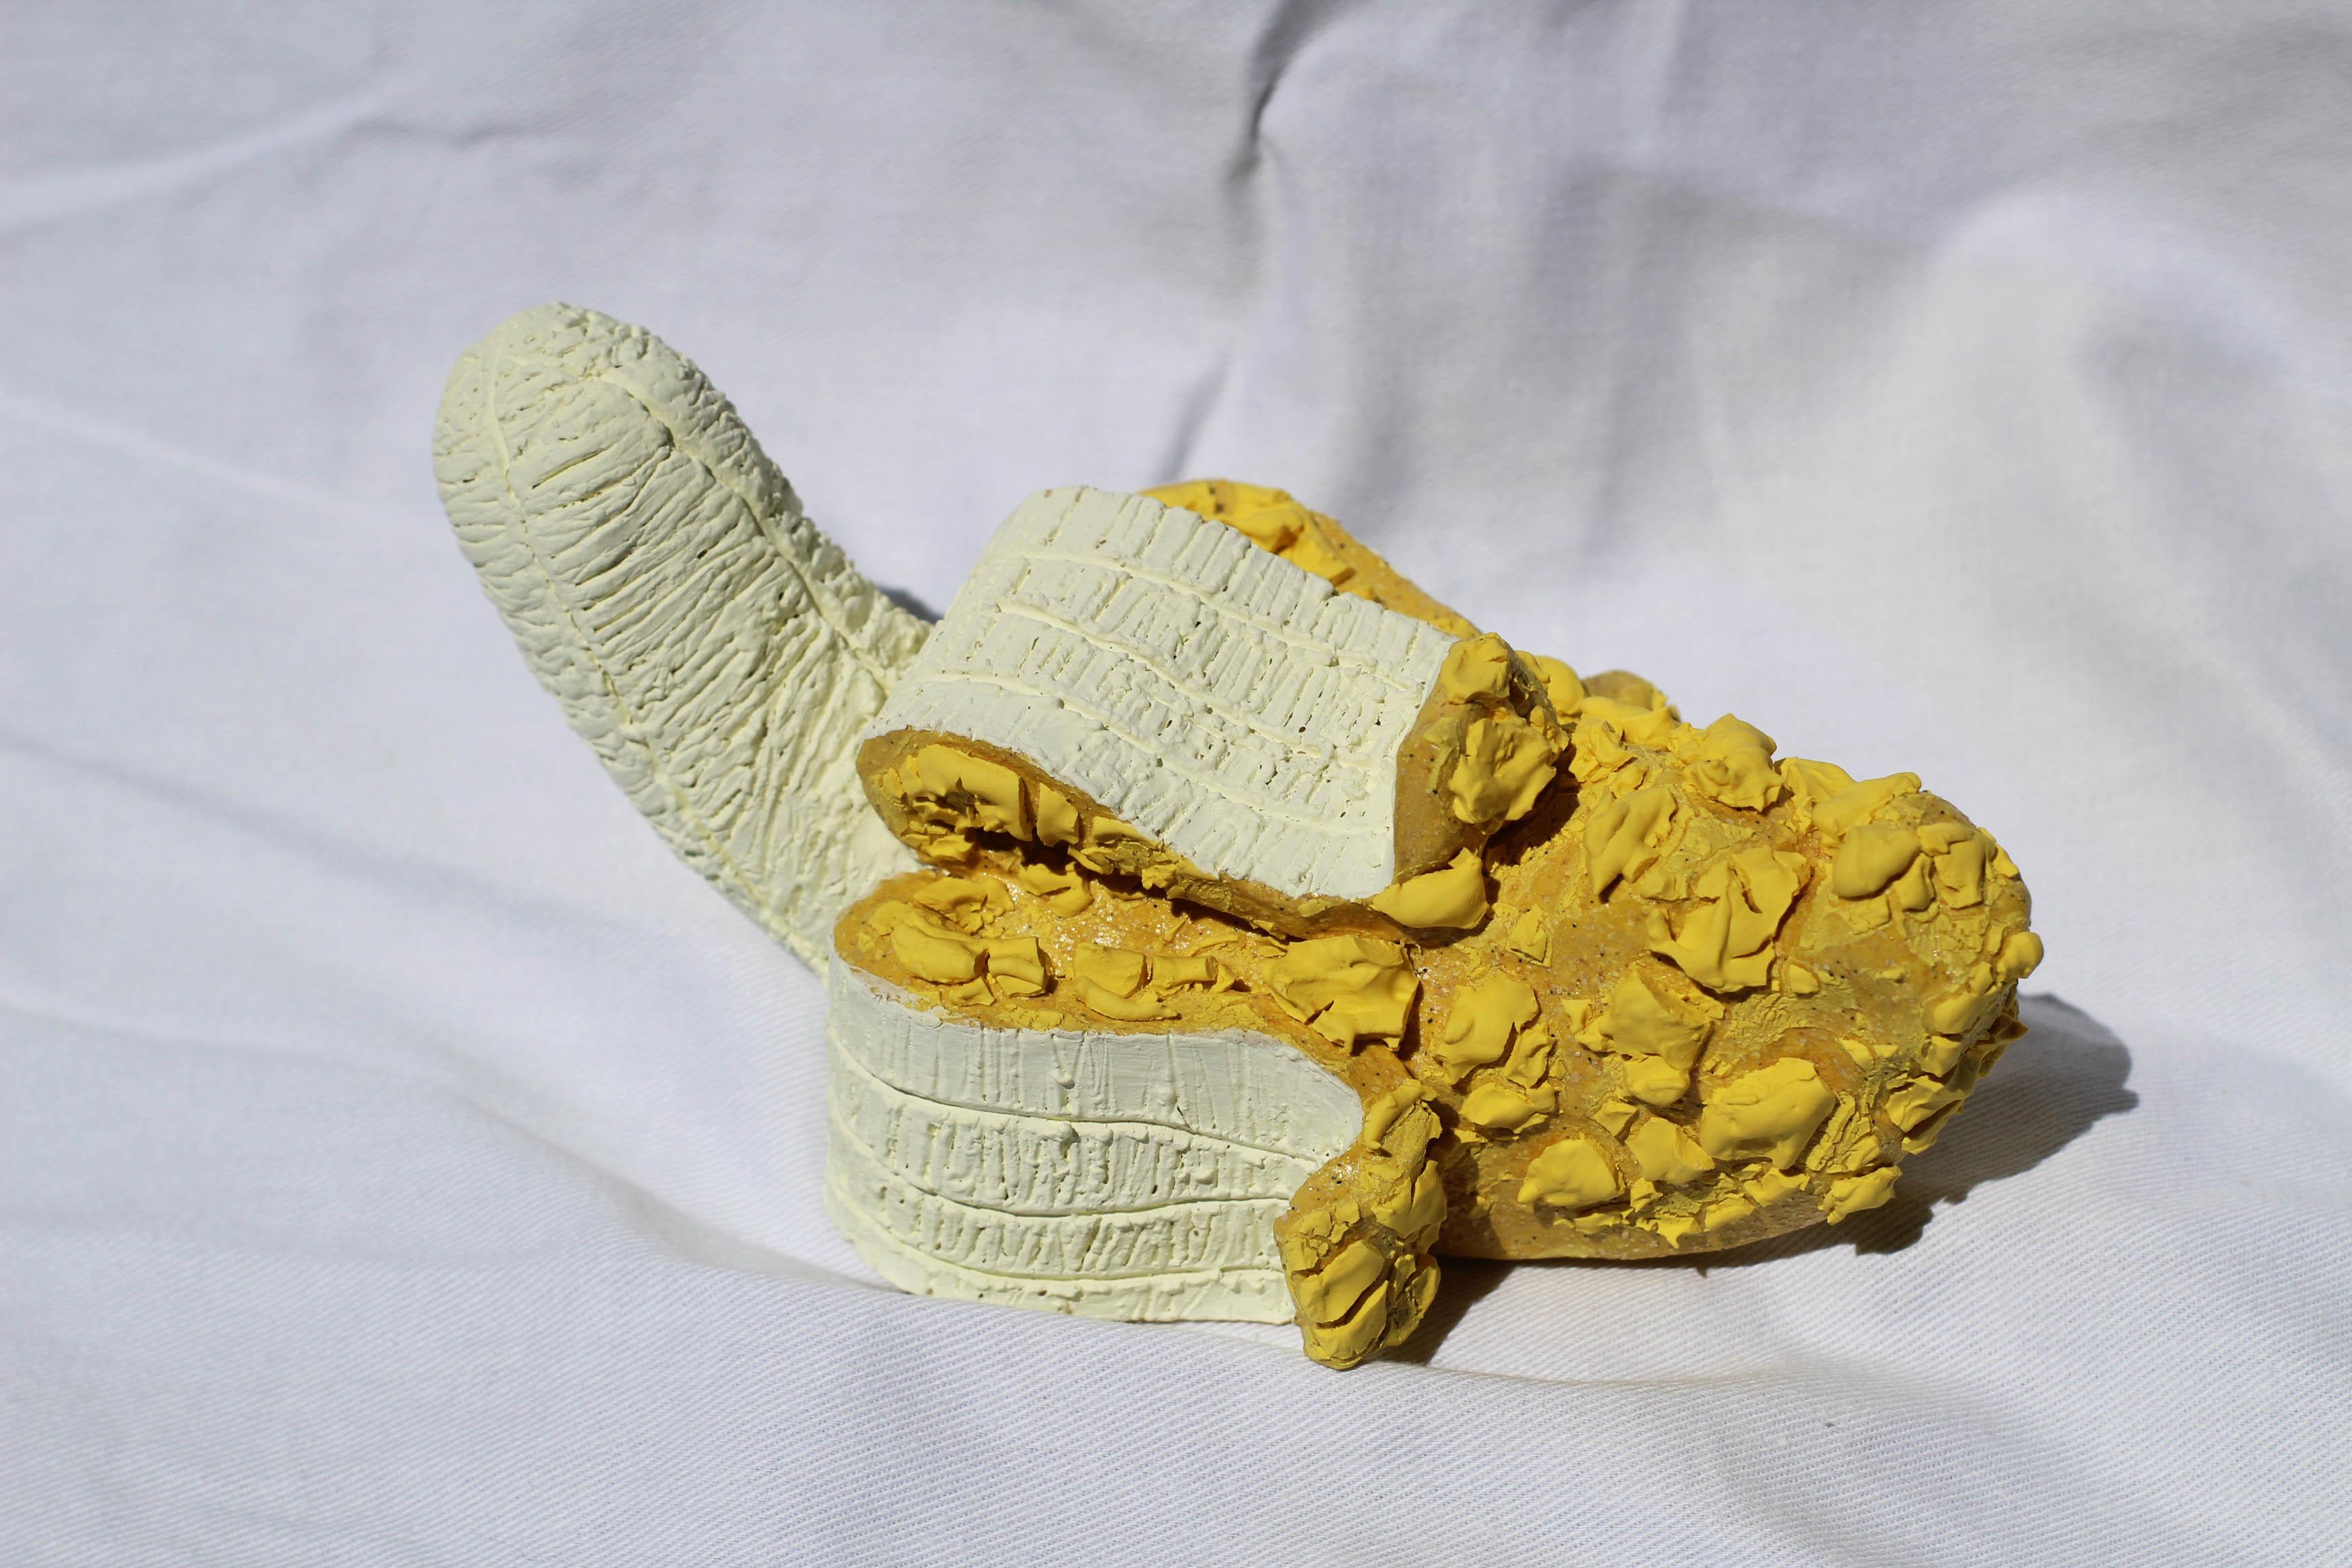 It's yellow and it's annoying?

A banana-na-na-na-na.

But this one is sweet. You can hang this textured banana on the wall. I just won't eat it. But if you want, you can touch it.

Handcrafted texture banana made of ceramics. You can hang it